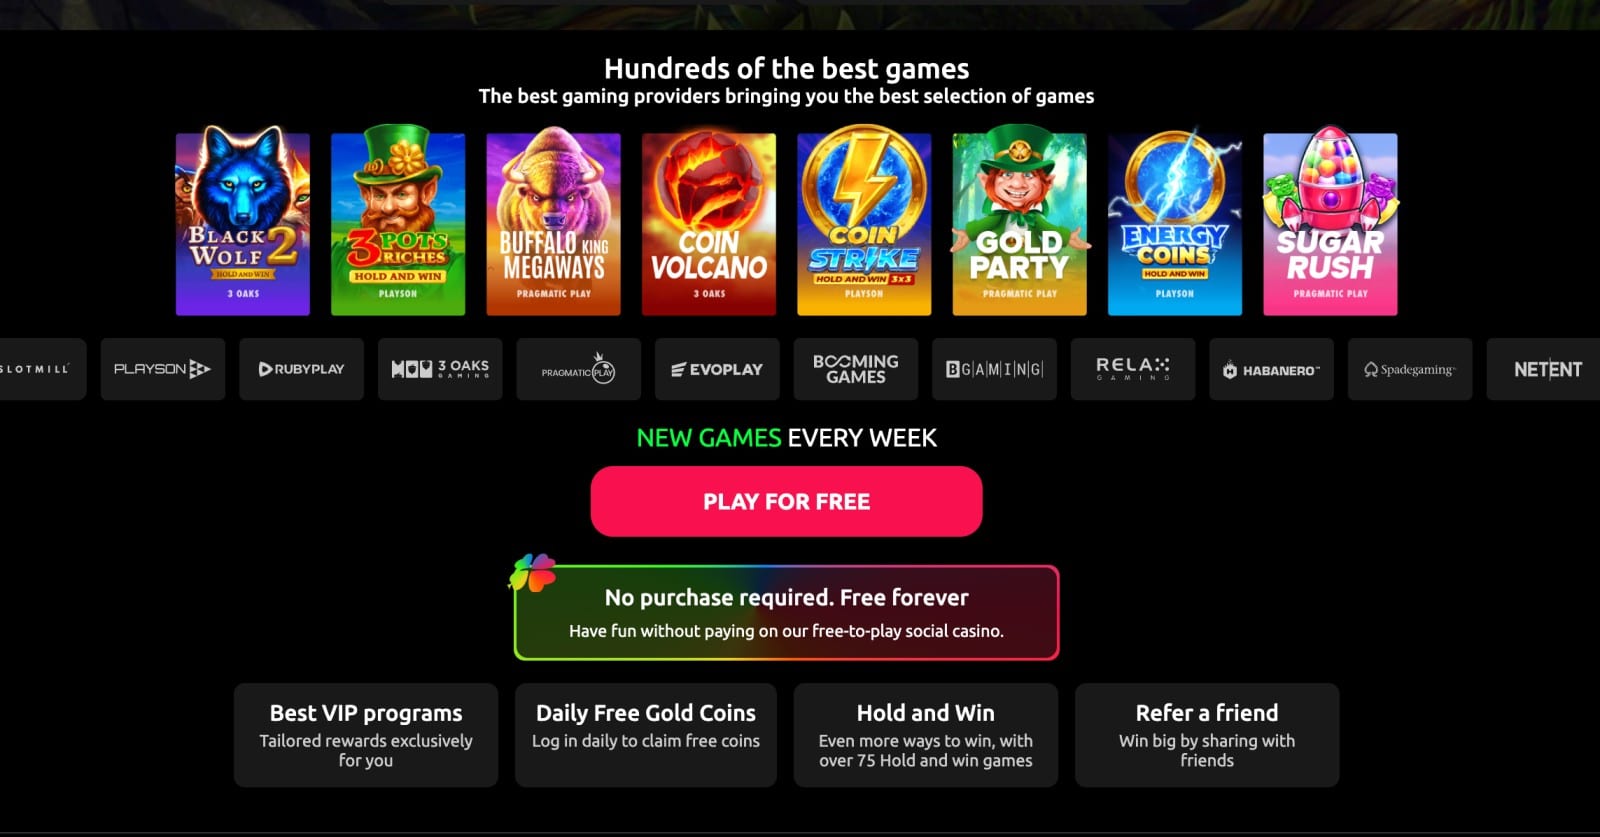 McLuck free slot games